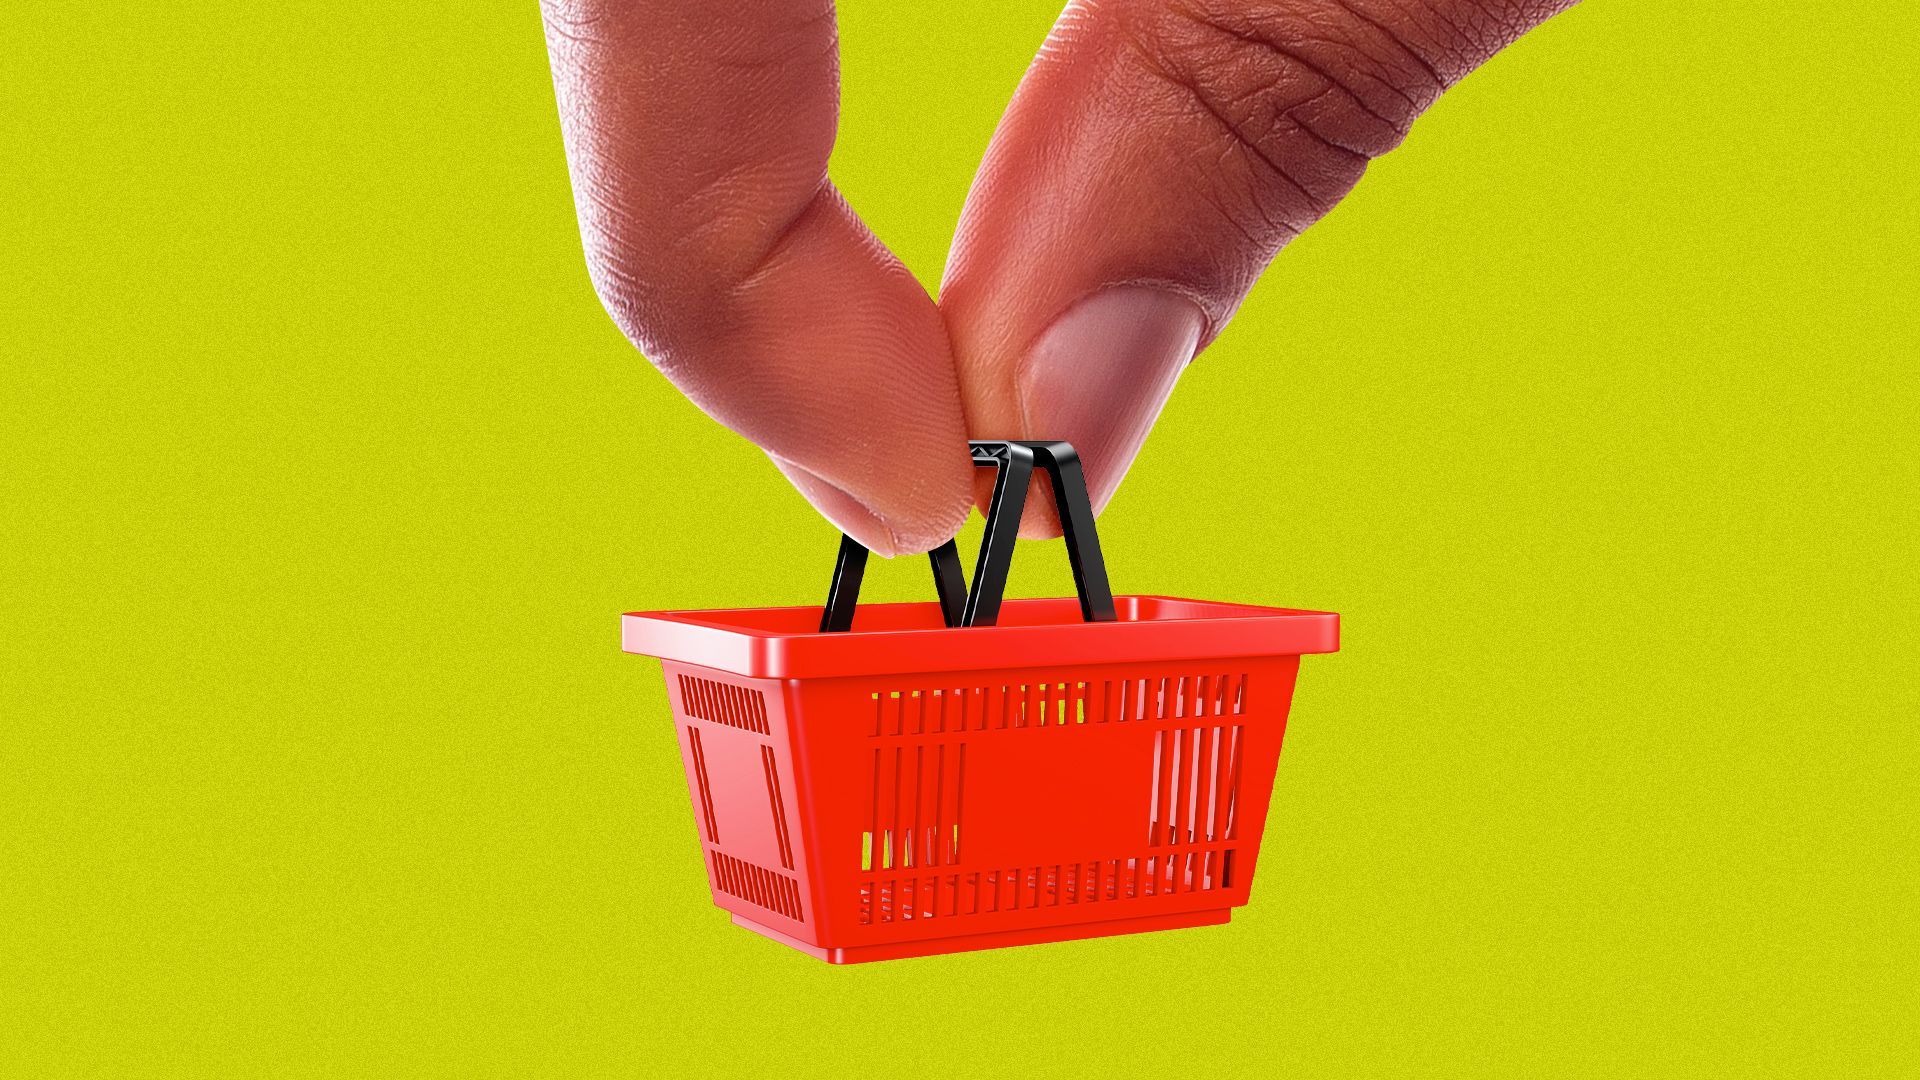 Illustration of a hand holding a tiny shopping basket pinched between two fingers. 